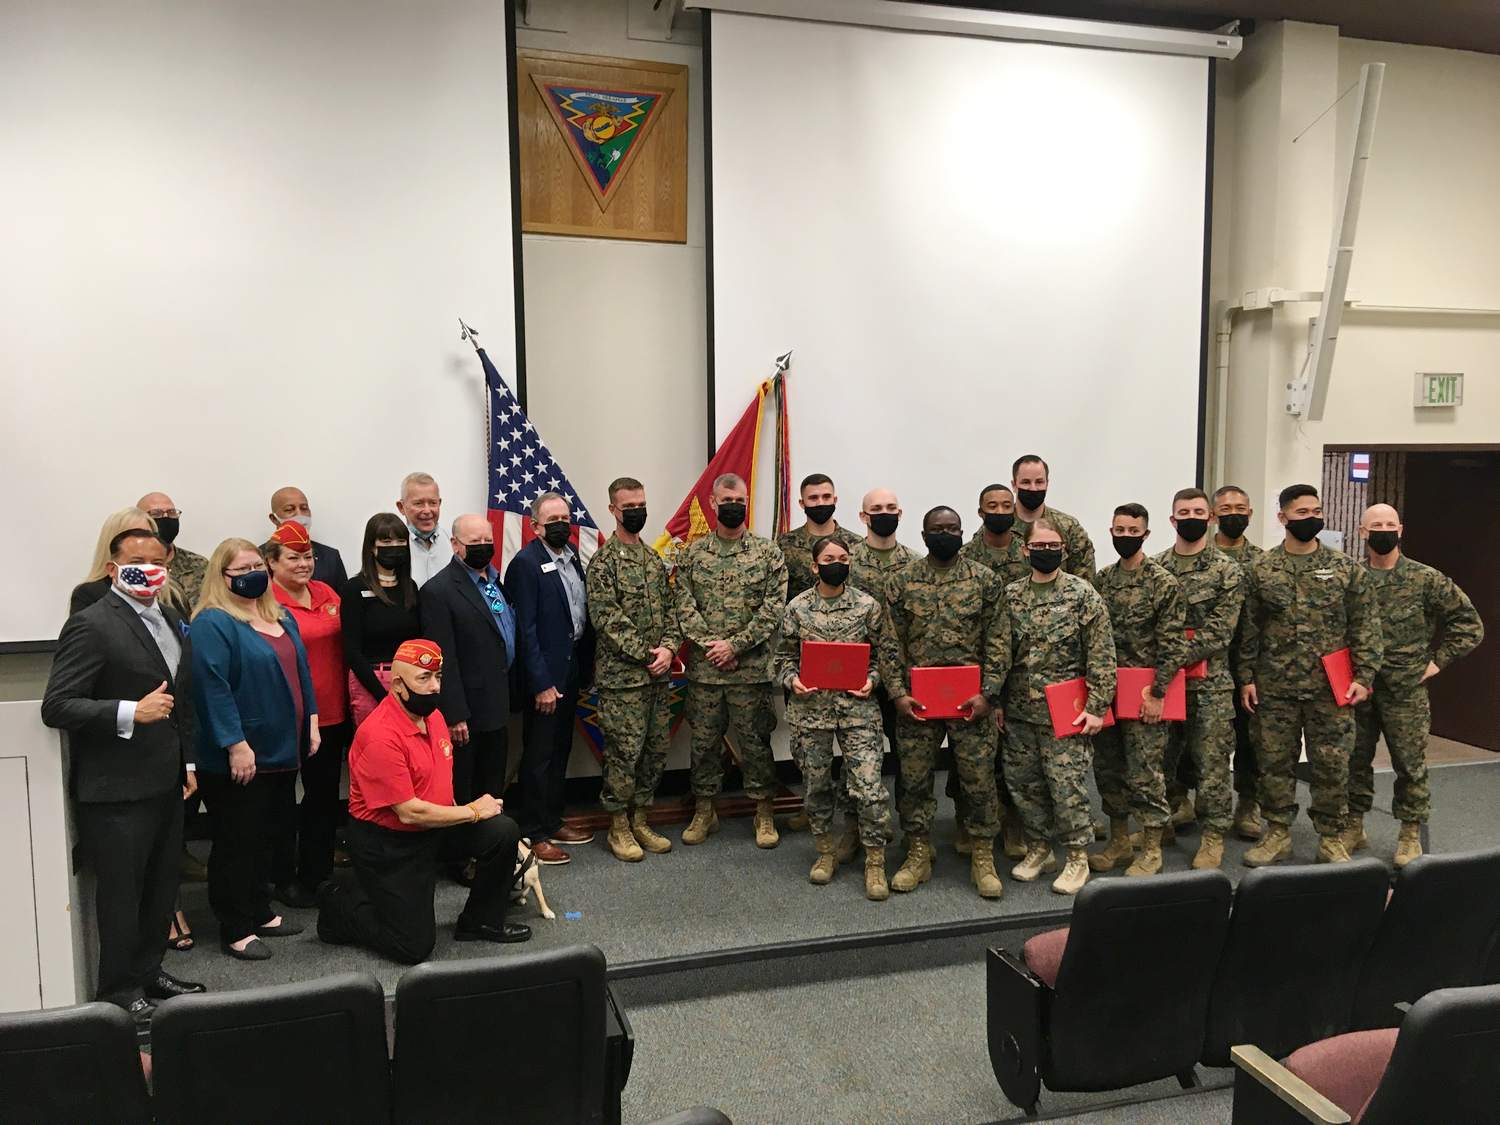 Lockheed Martin’s, award sponsor, Al Worthy and Sea Service Chair Ernest Belmares were on hand to congratulate the Marines and Sailors of the Quarter from MCAS Miramar and 3d Marine Aircraft Wing.